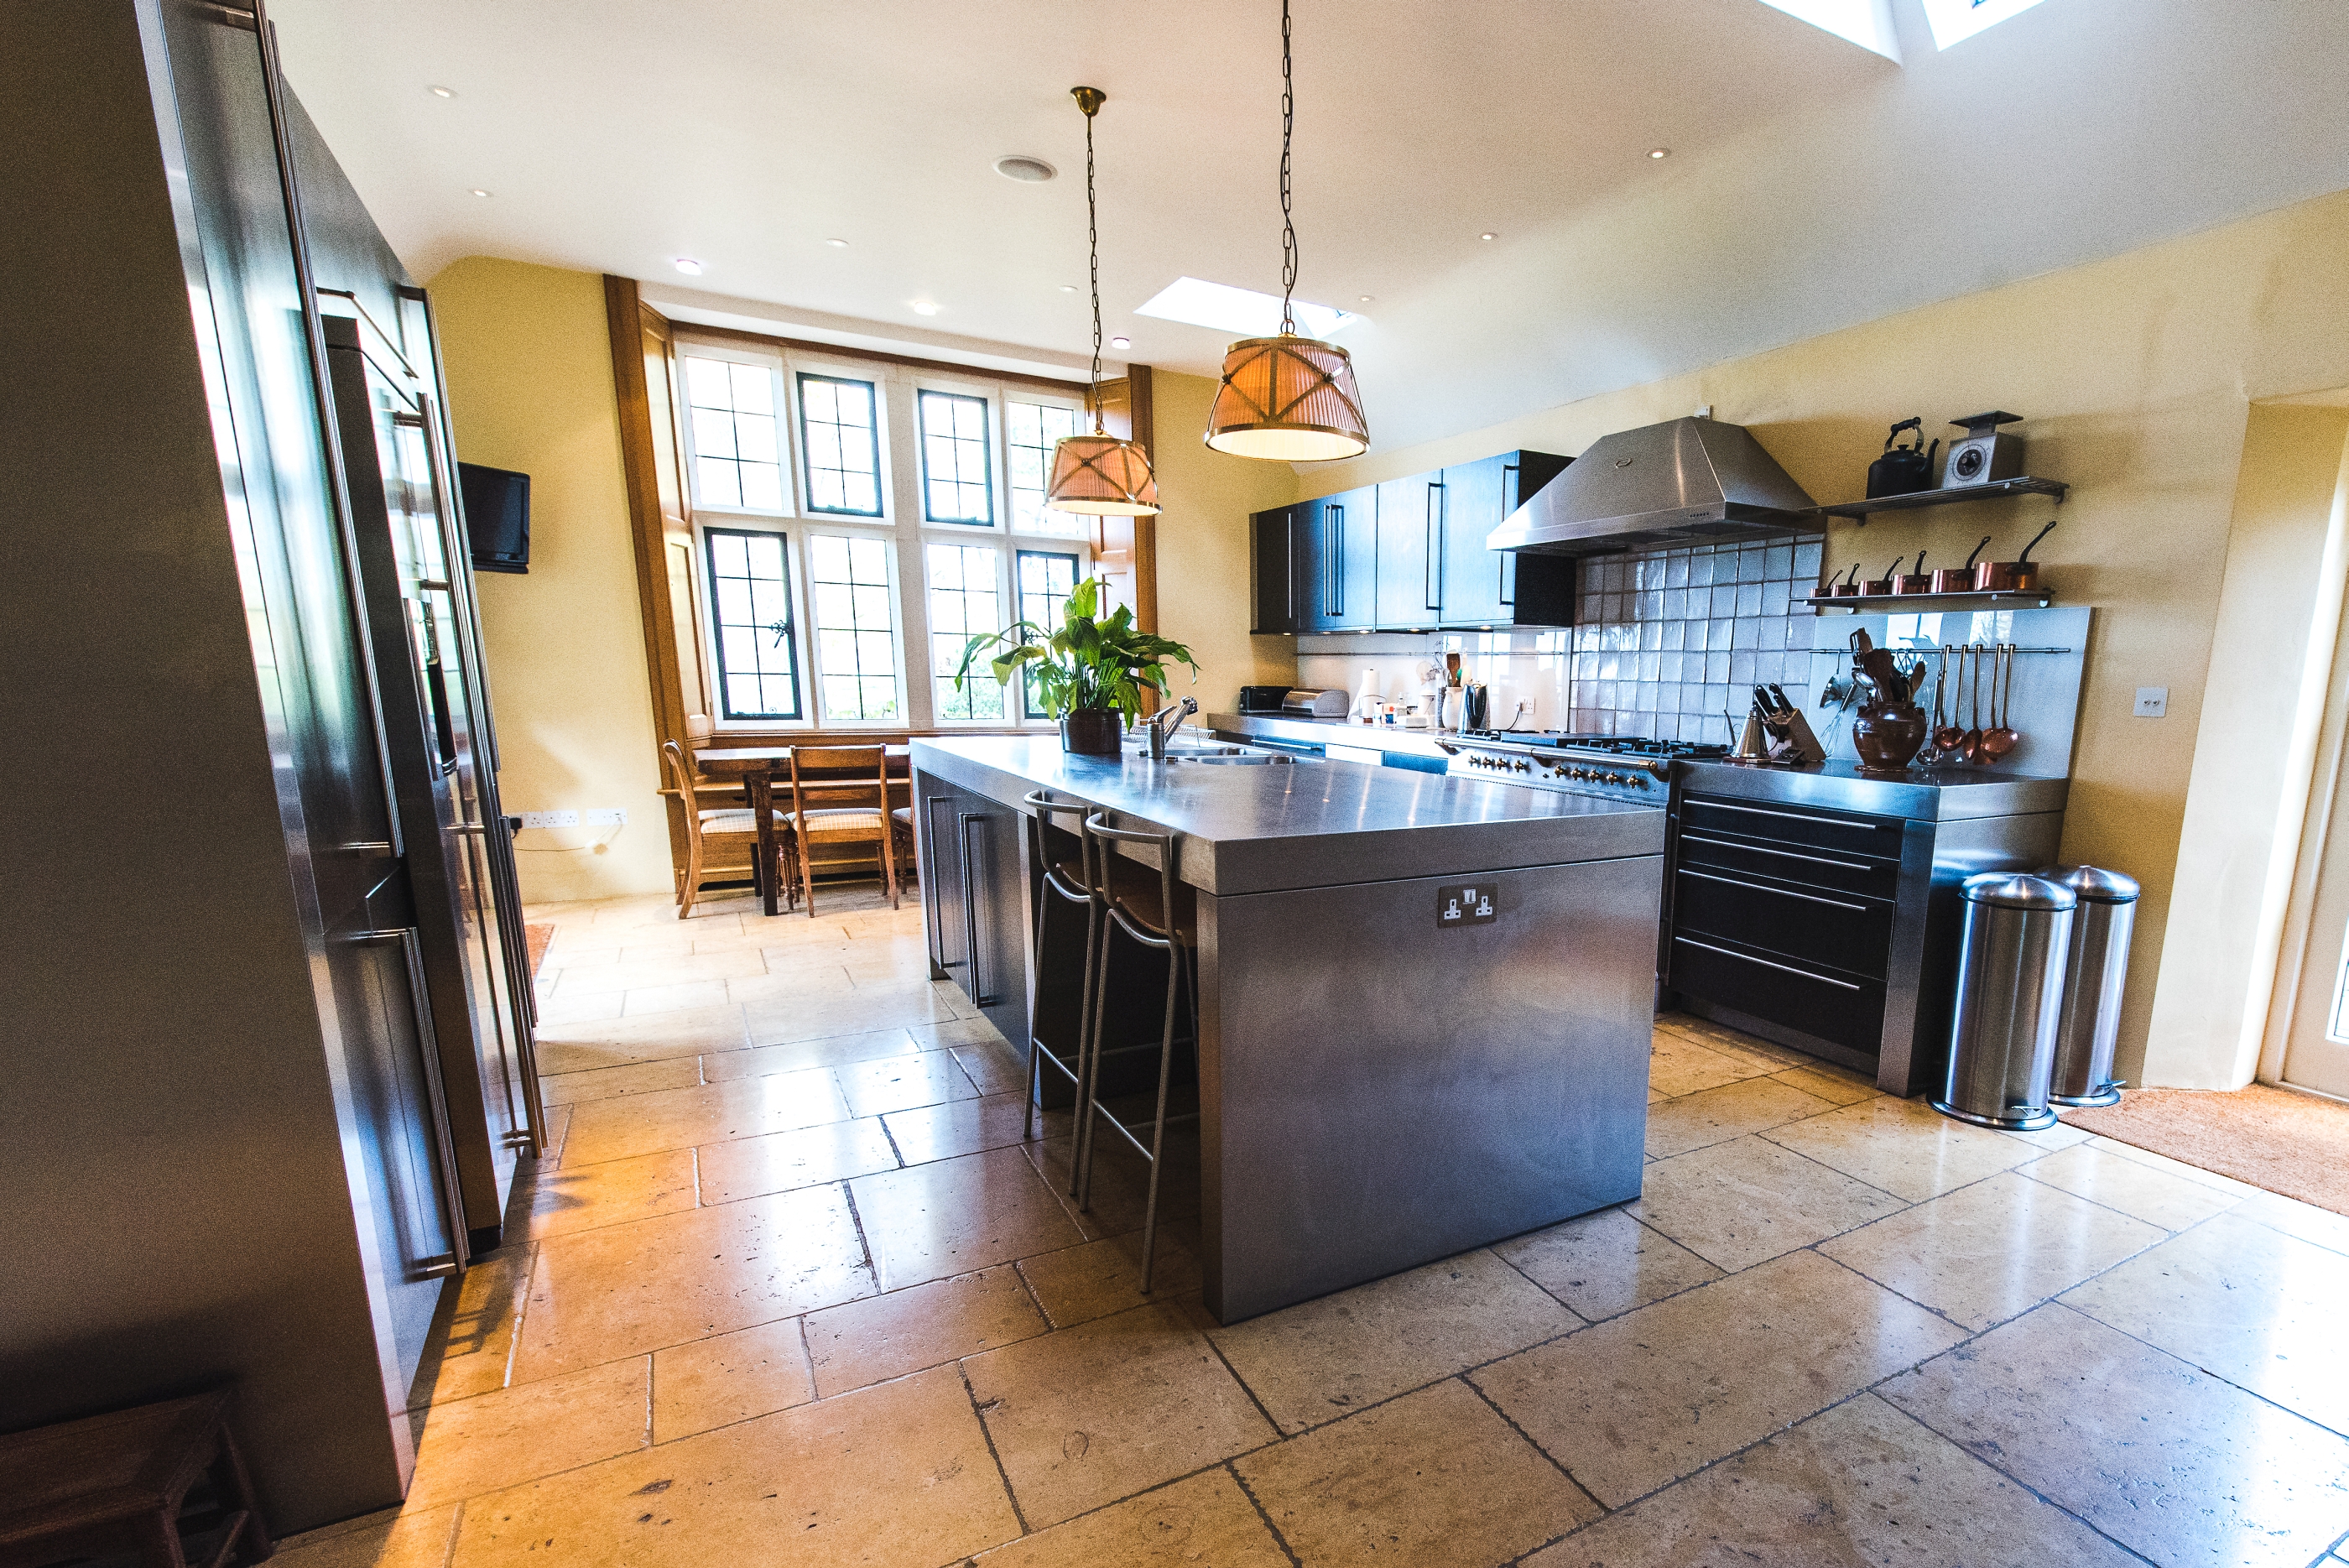 Kitchen of Manor in the Rissingtons, Cotswolds